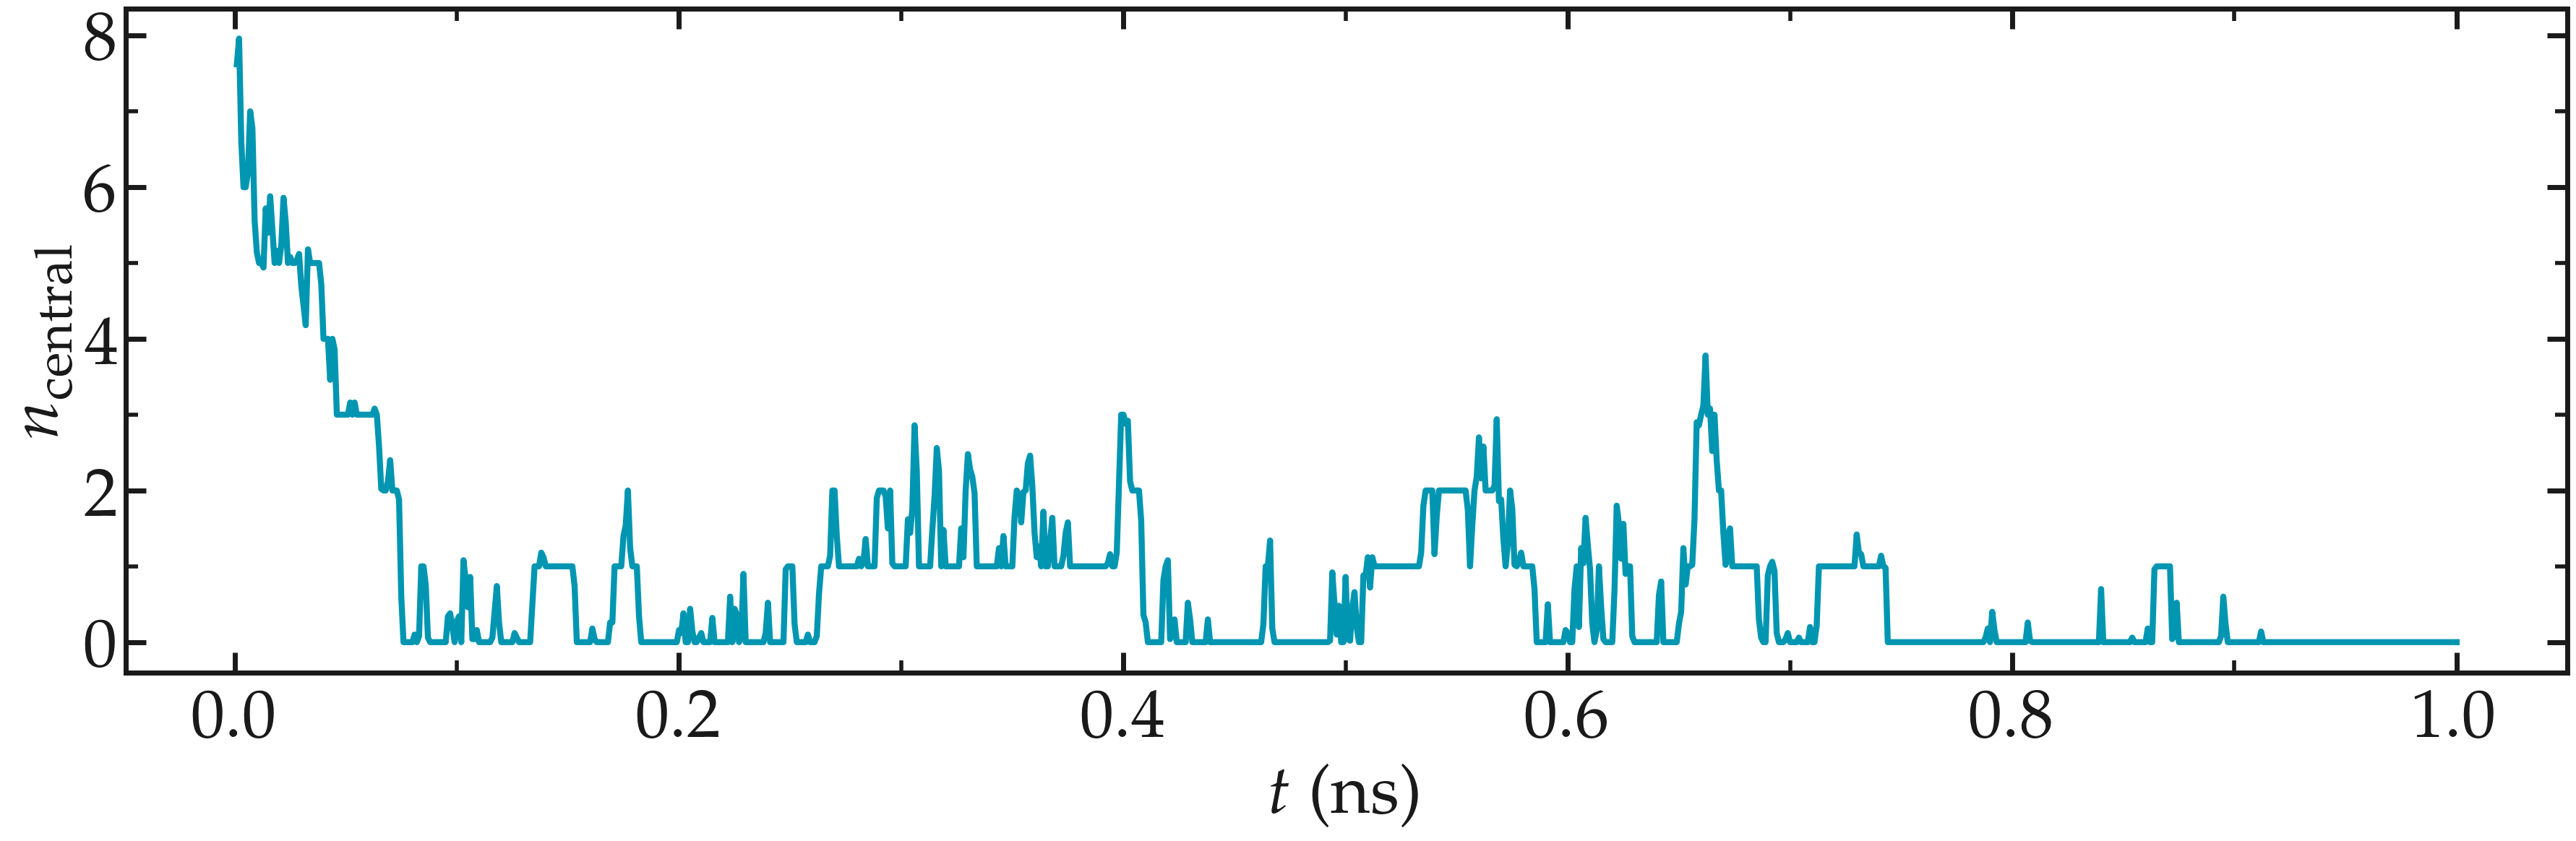 Number of particles in the central region as a function of time